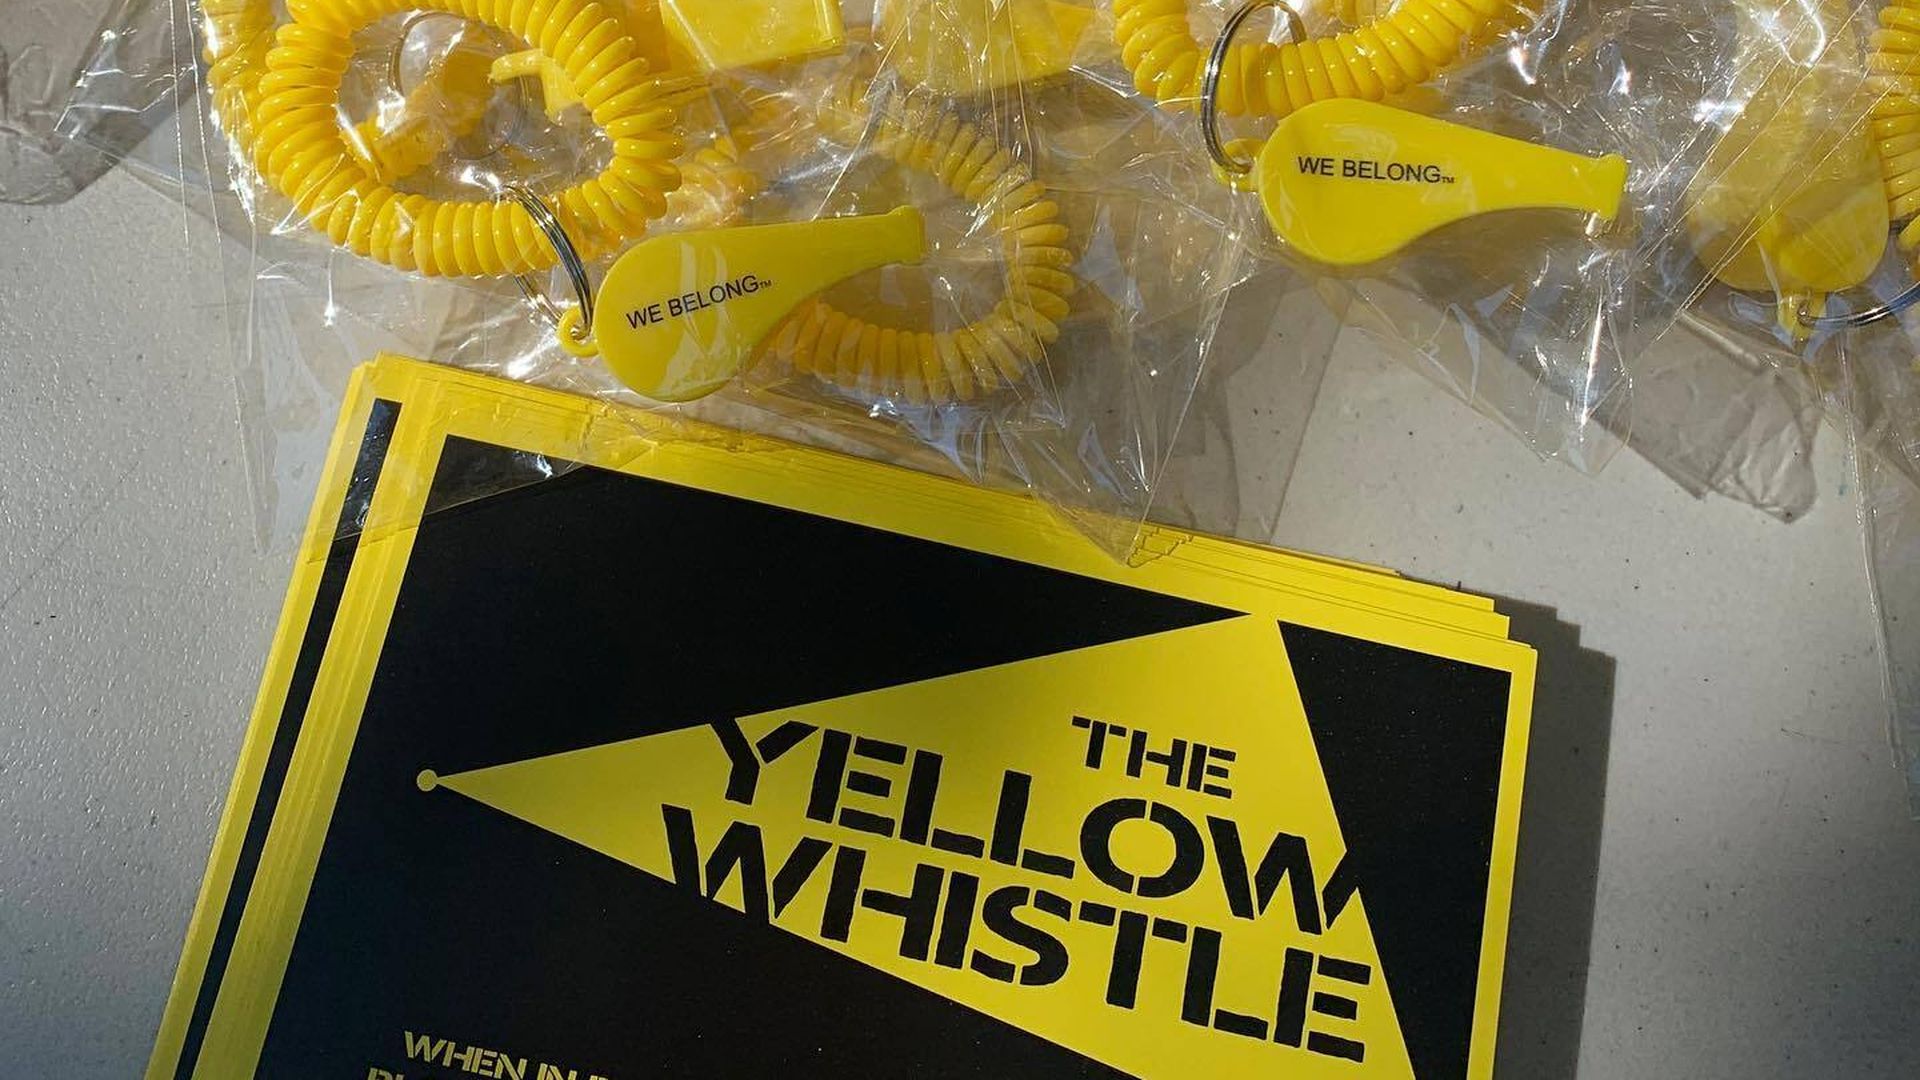 The Yellow Whistle. Photo: Courtesy of The Yellow Whistle campaign